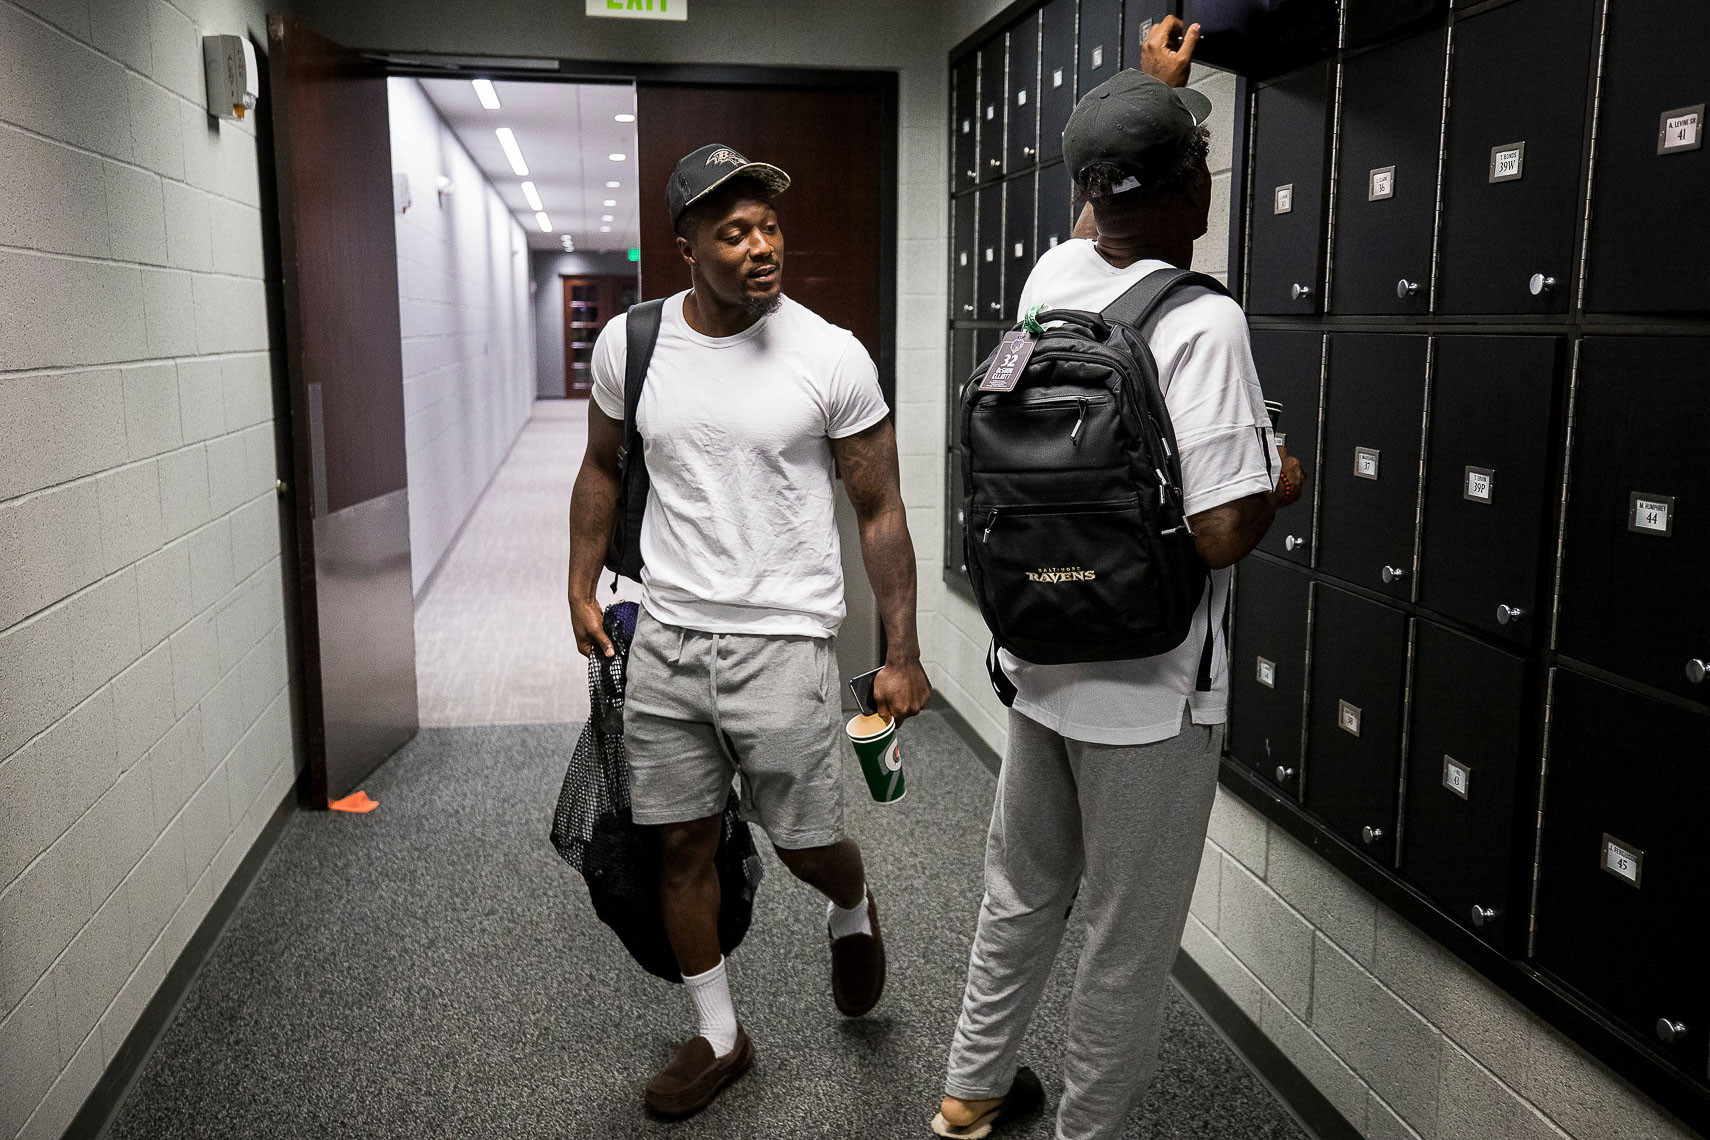 A day in the life of an NFL player documentary story by Baltimore photojournalist Shawn Hubbard